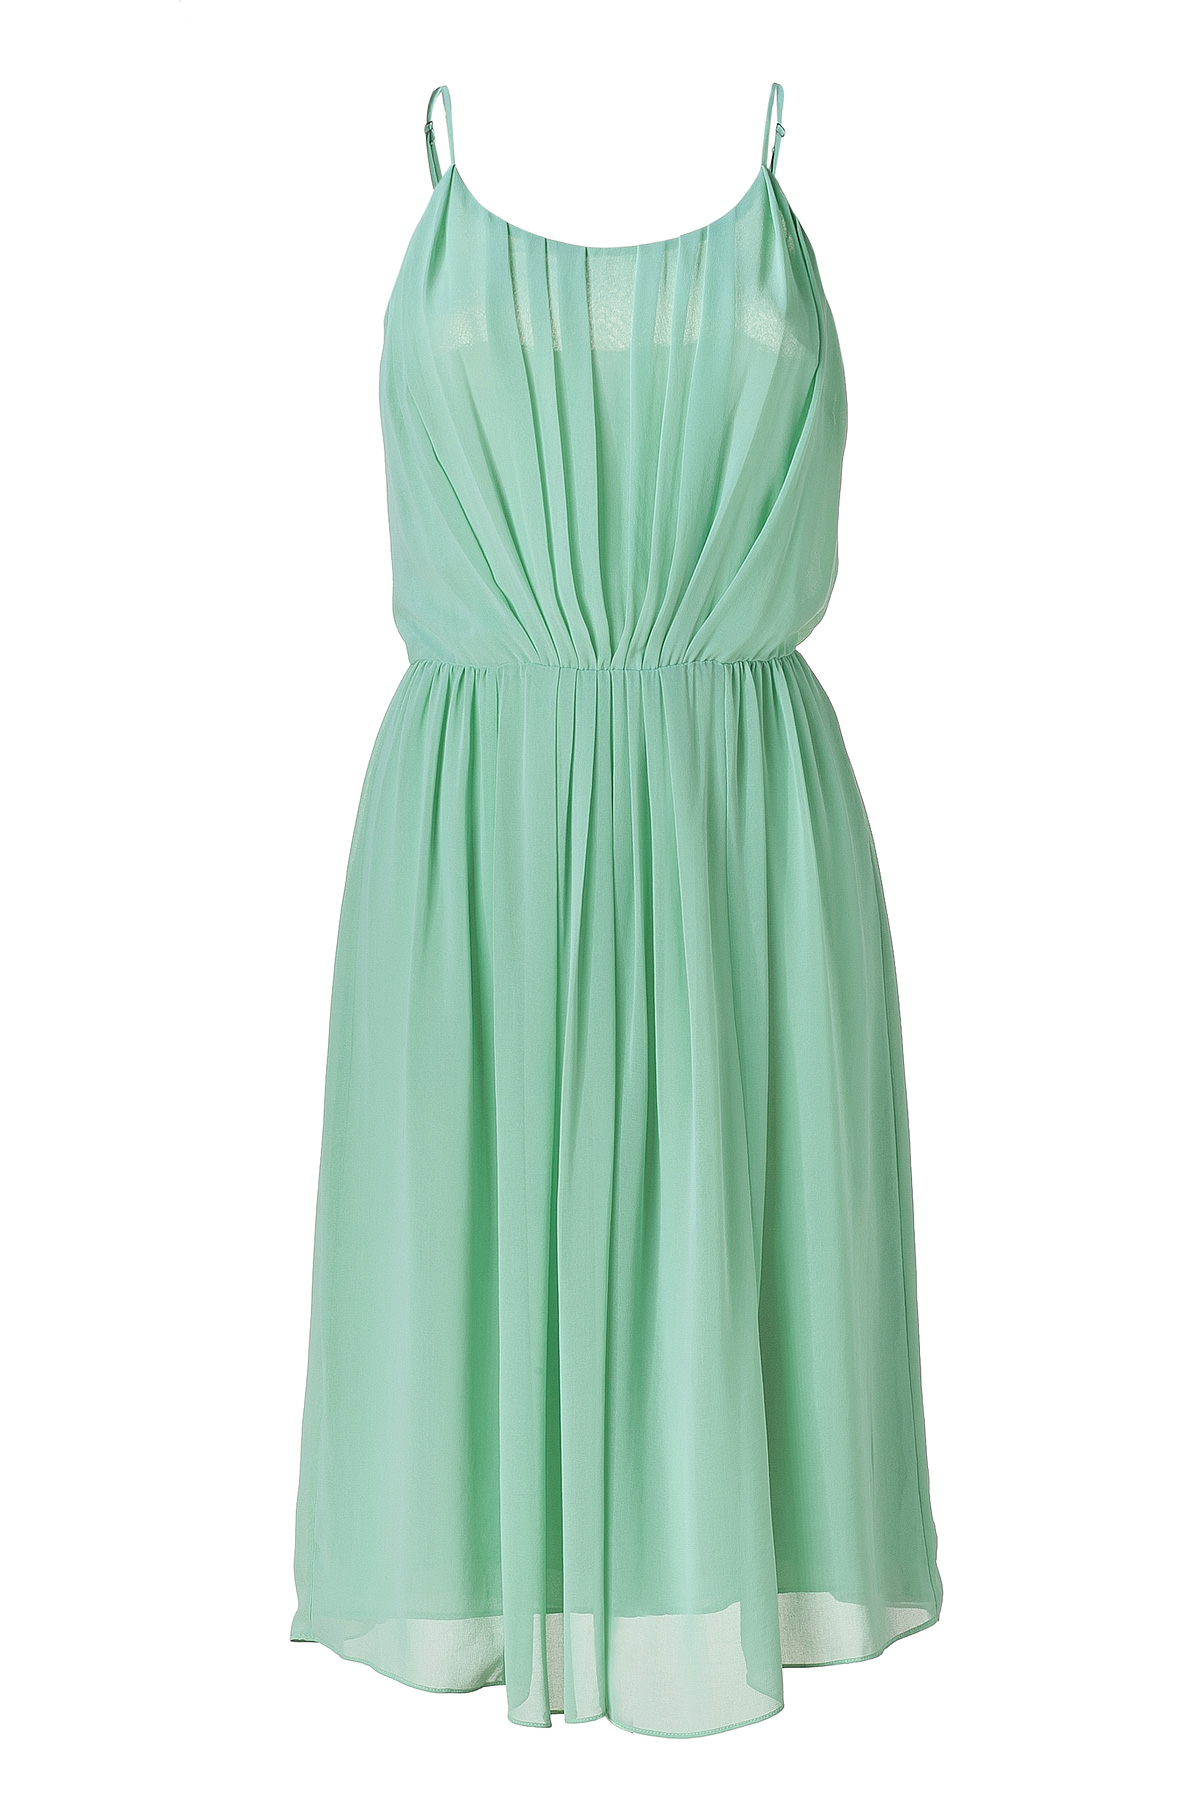 Lyst - Sandro Pale Green Pleated Dress in Green